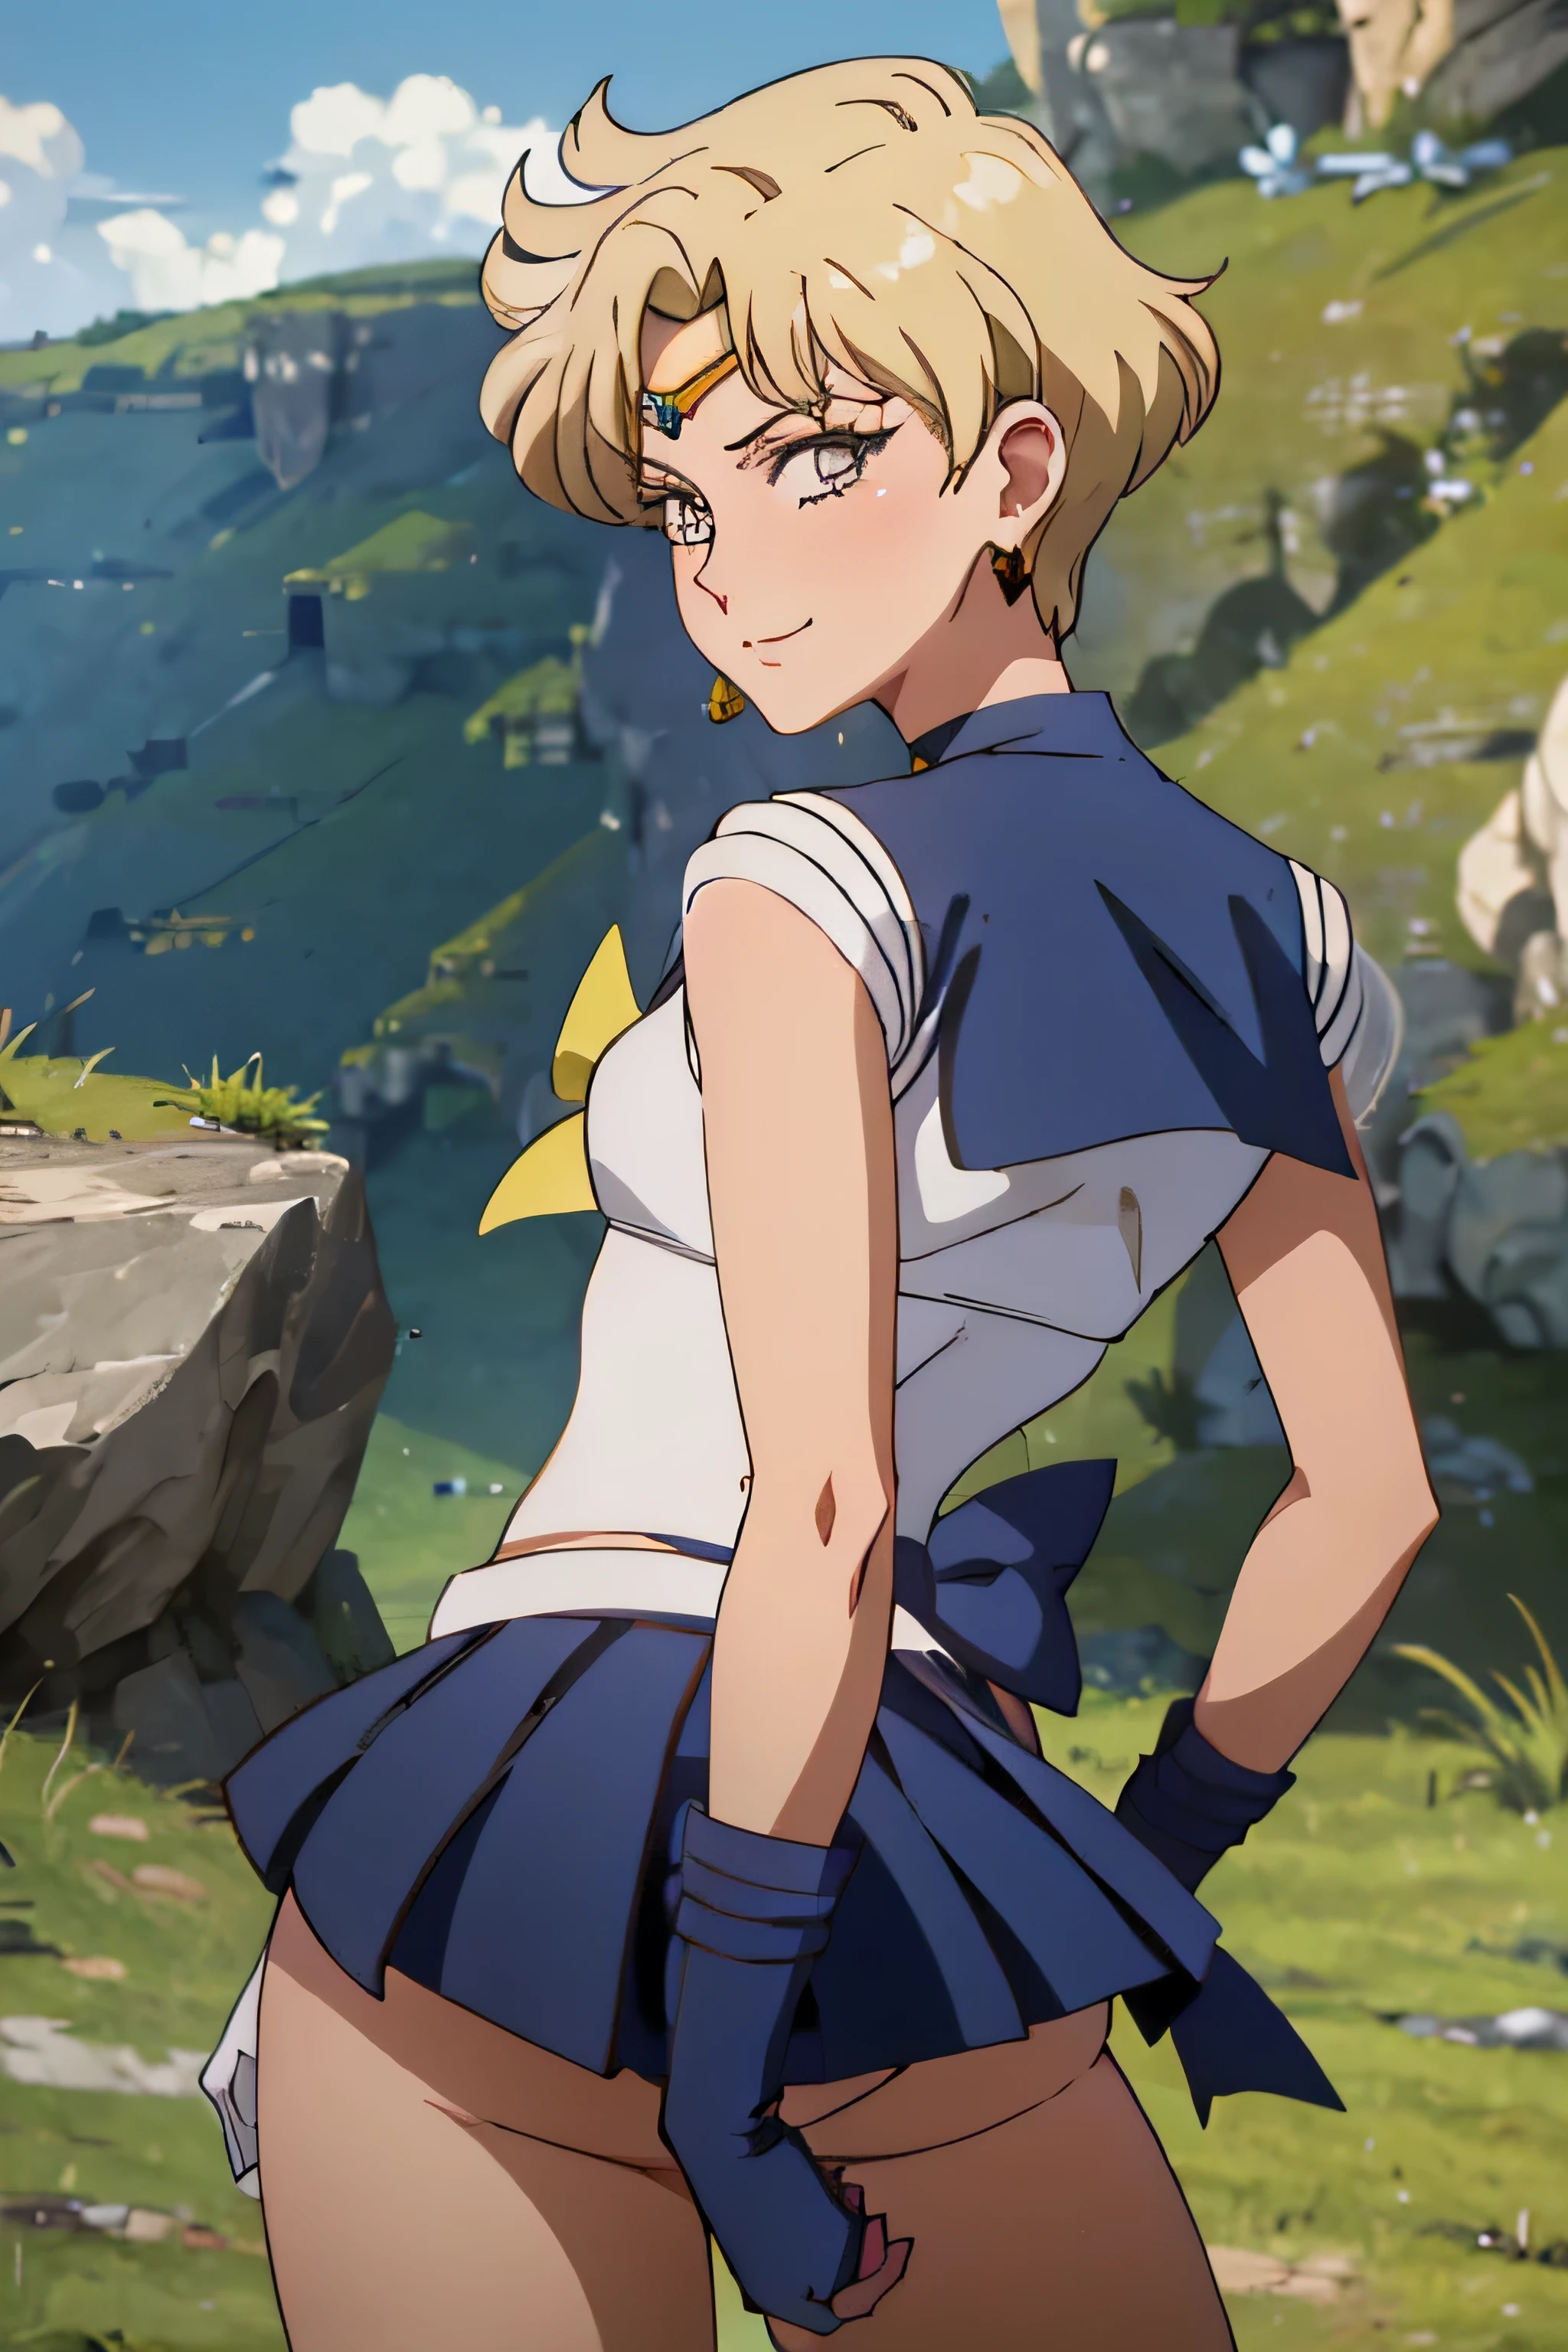 (The best quality:1.1), (Masterpiece:1.4), (absurdities:1.0), portrait, foreground,1girl, Sailor Uranus, KizukiAi, mature woman, small breasts, aqua eyes, blond hair, Uniforme Sailor Senshi, Sailor necklace, chest arch, Back arch, Supplicant skirt, White elbow gloves, big booty, Ultra miniskirt , jewely, earrings,, in back position, Show off your loot, Backwards, no thong big booty, Ultra miniskirt ( back posture, Backwards, Show off your loot) (POINT OF VIEW FROM BOTTOM TO UP) (Booty close up) ( They are smiling, naughty face) (no skirt)